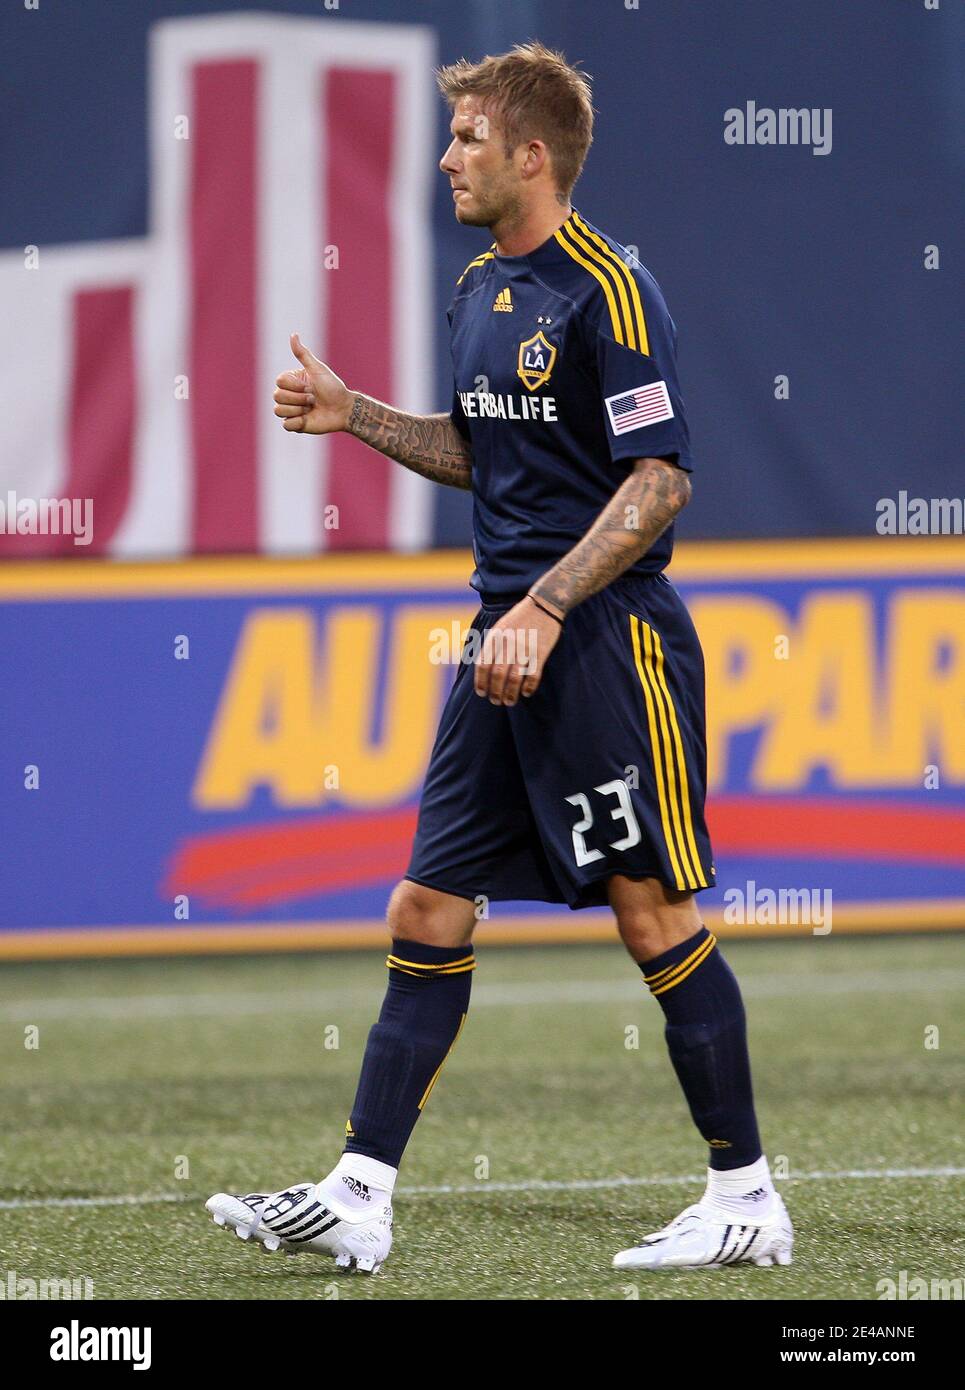 David Beckham during the soccer game New York Red Bulls vs Los Angeles  Galaxy at Giants Stadium in the Meadowlands in East Rutherford in New Jersey ,USA on July 16, 2009. Photo by